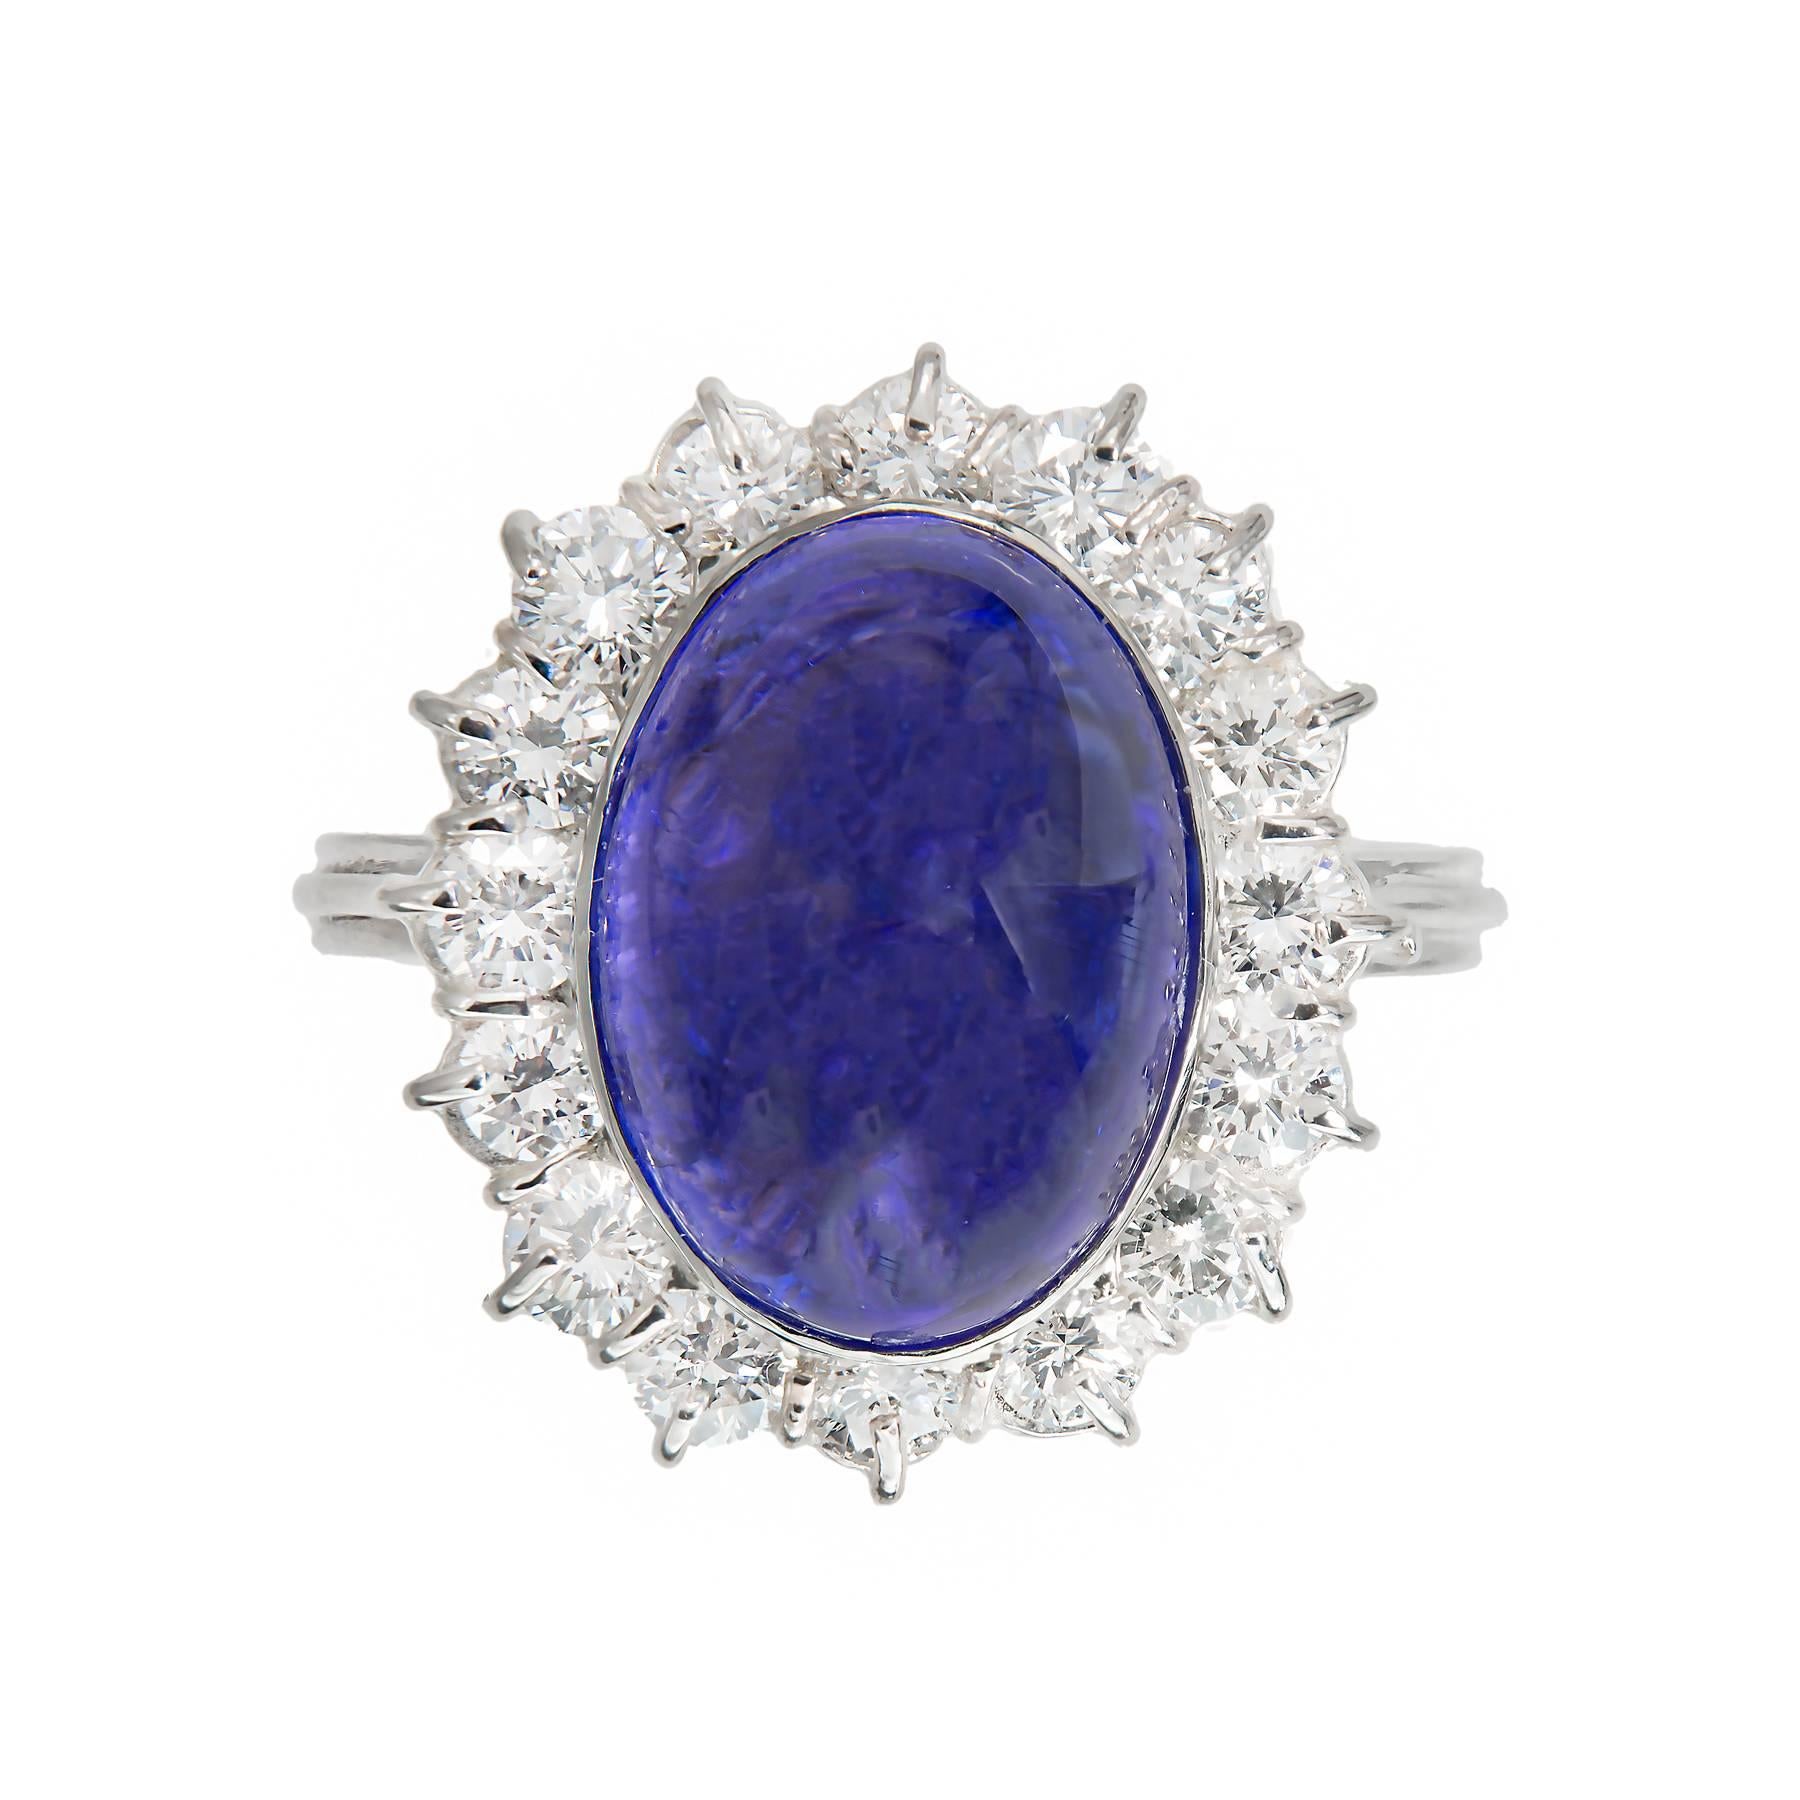 Oval Cabochon Tanzanite halo engagement ring. 9.75ct oval center stone with a halo of 16 round diamonds in a 14k white gold original 1970's setting. There are moderate inclusions some of which are eye visible especially from the side.

One-gem